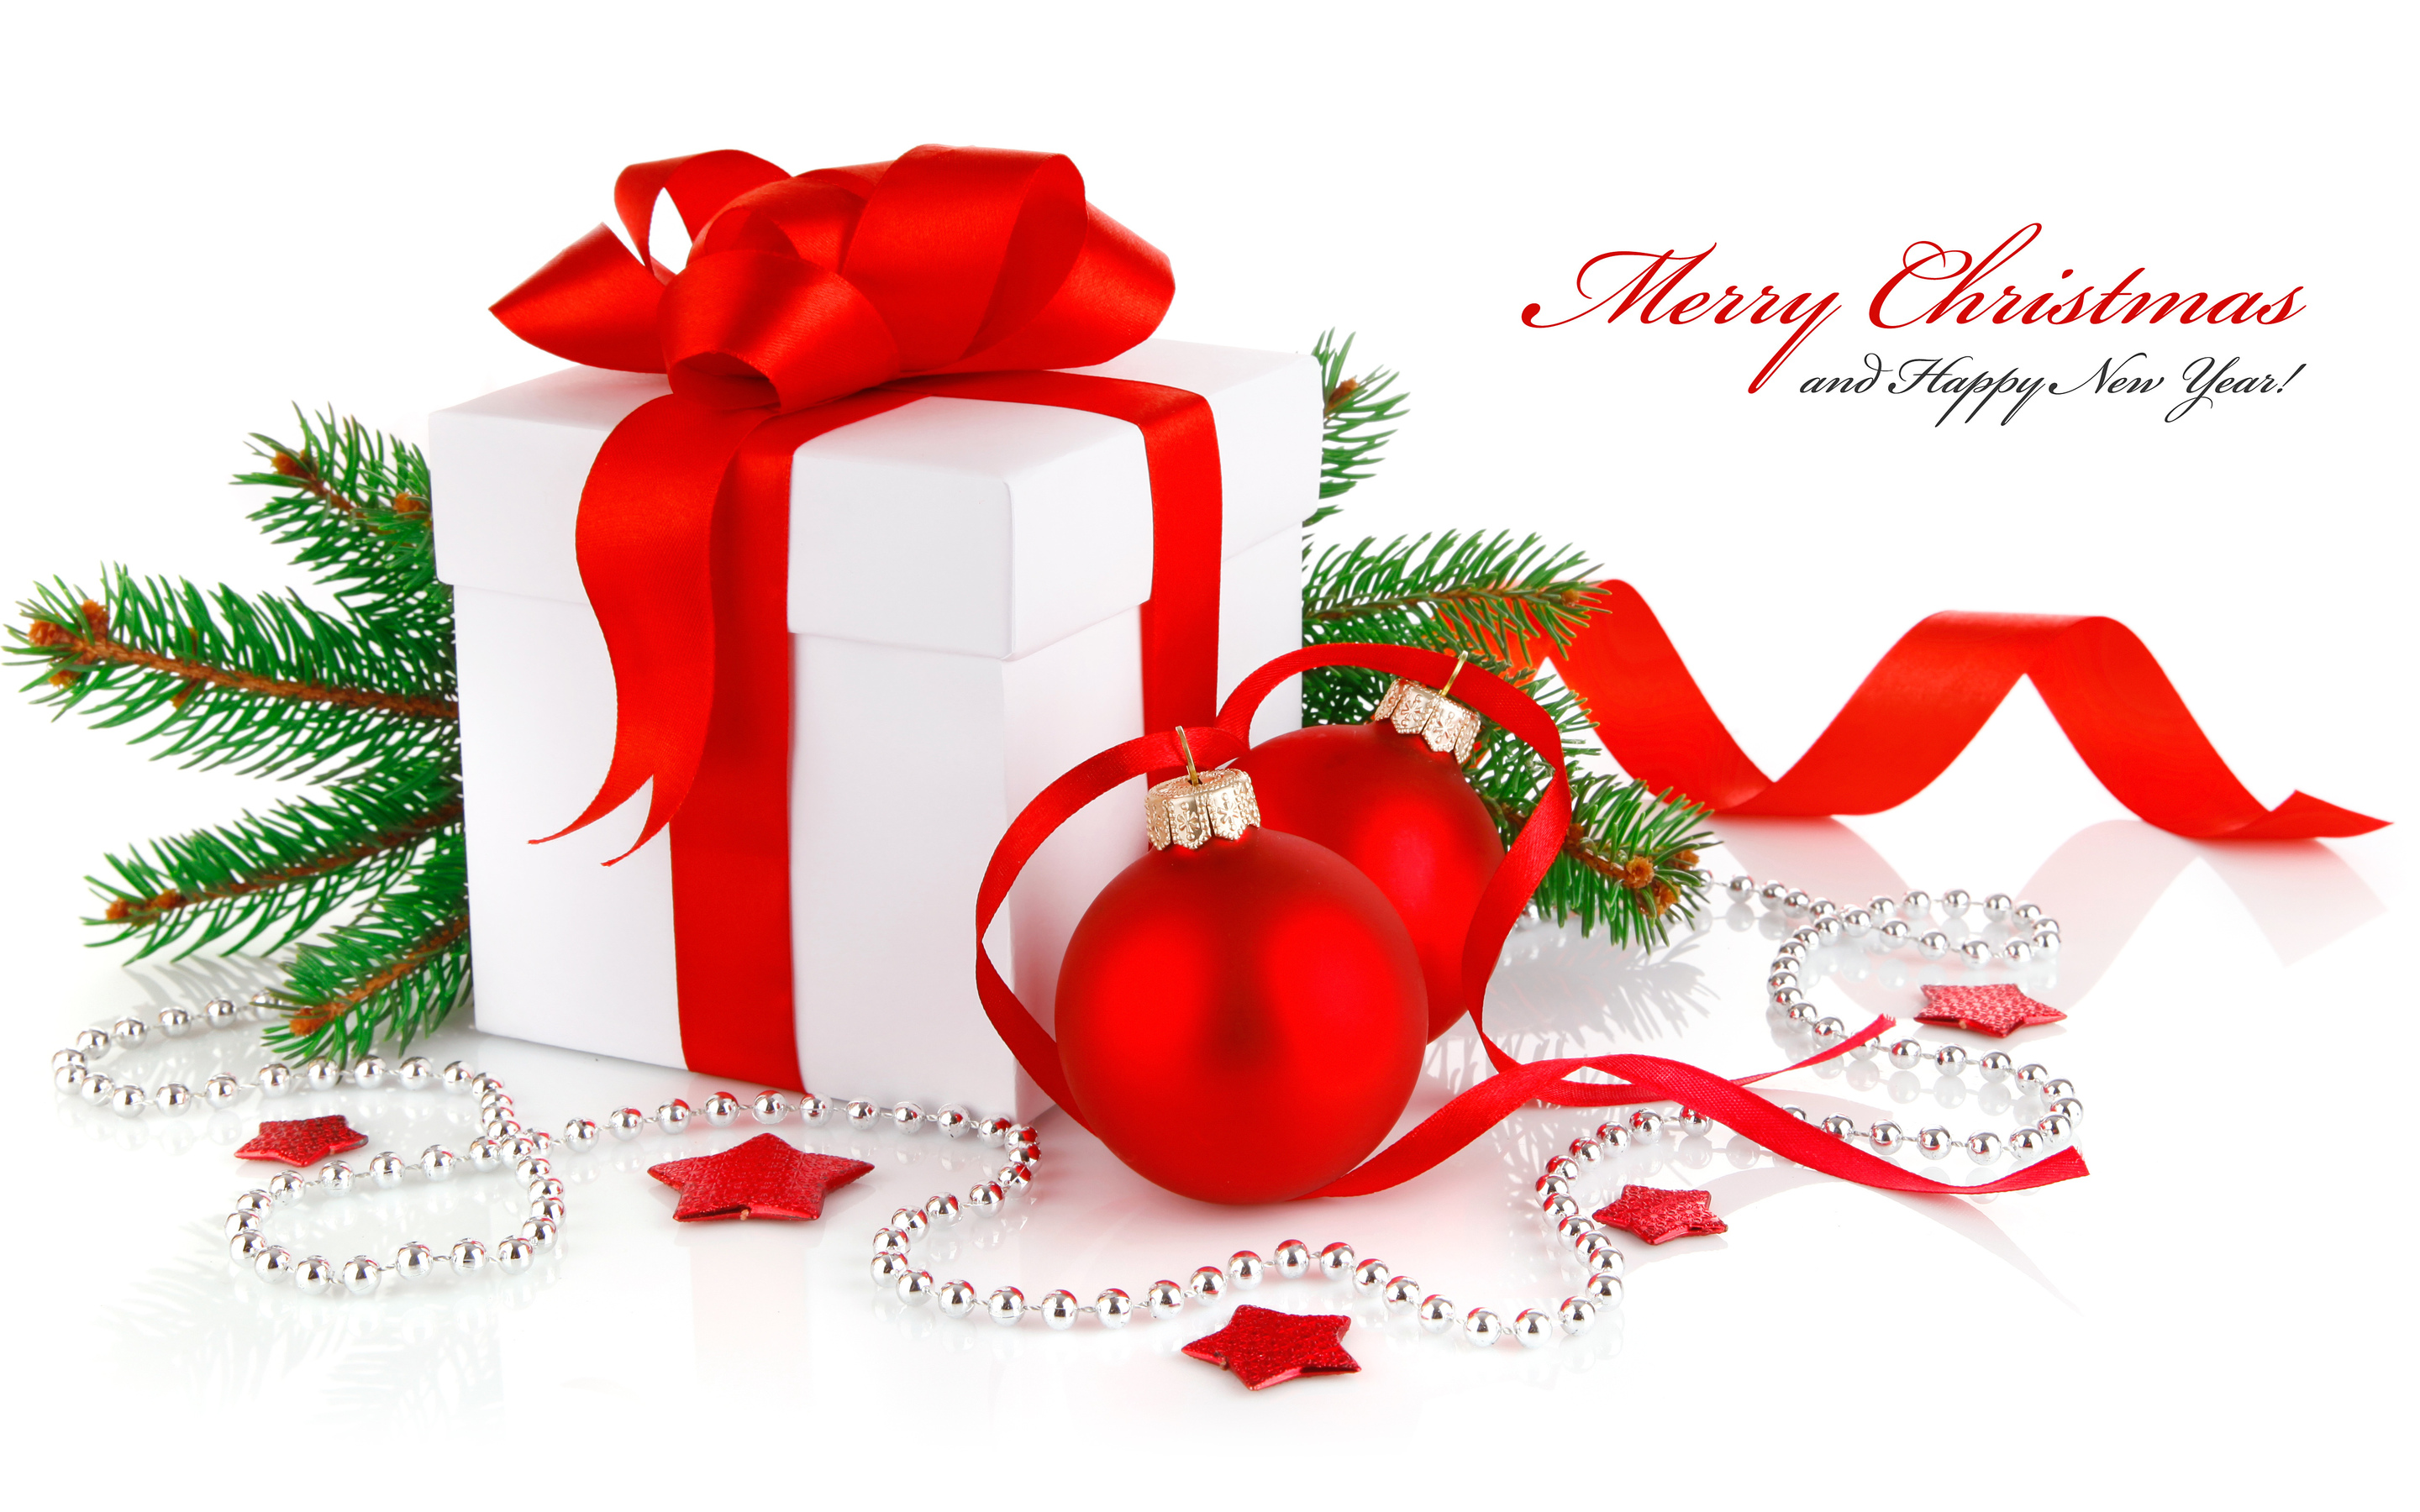 Merry Christmas And Happy New Year Picture HD Wallpaper